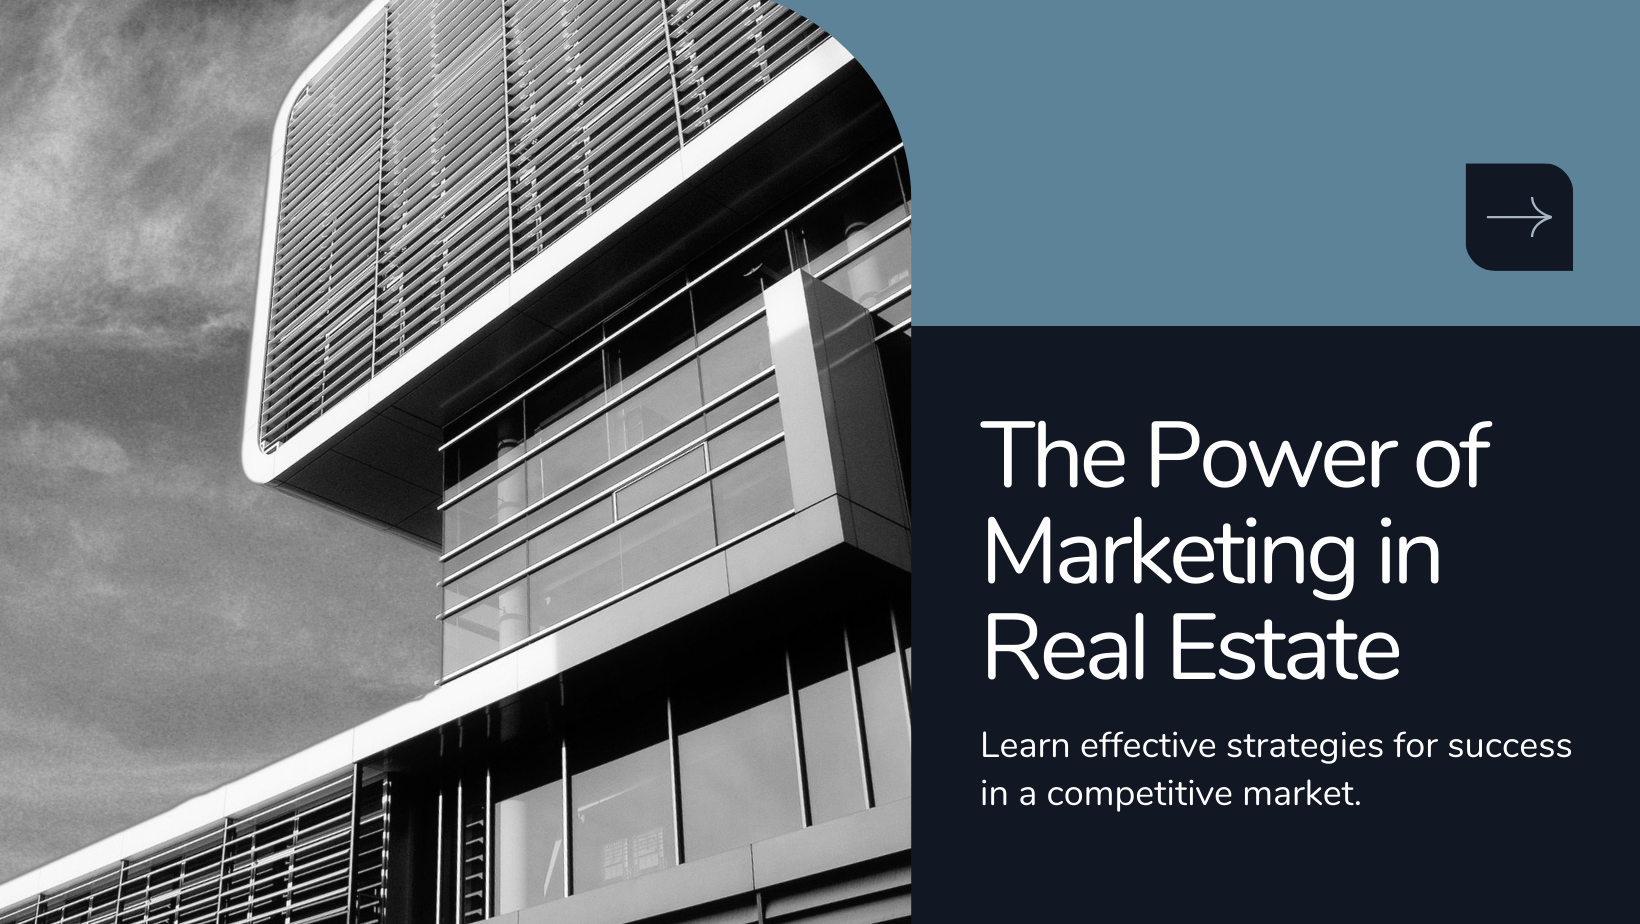 Marketing in Real Estate